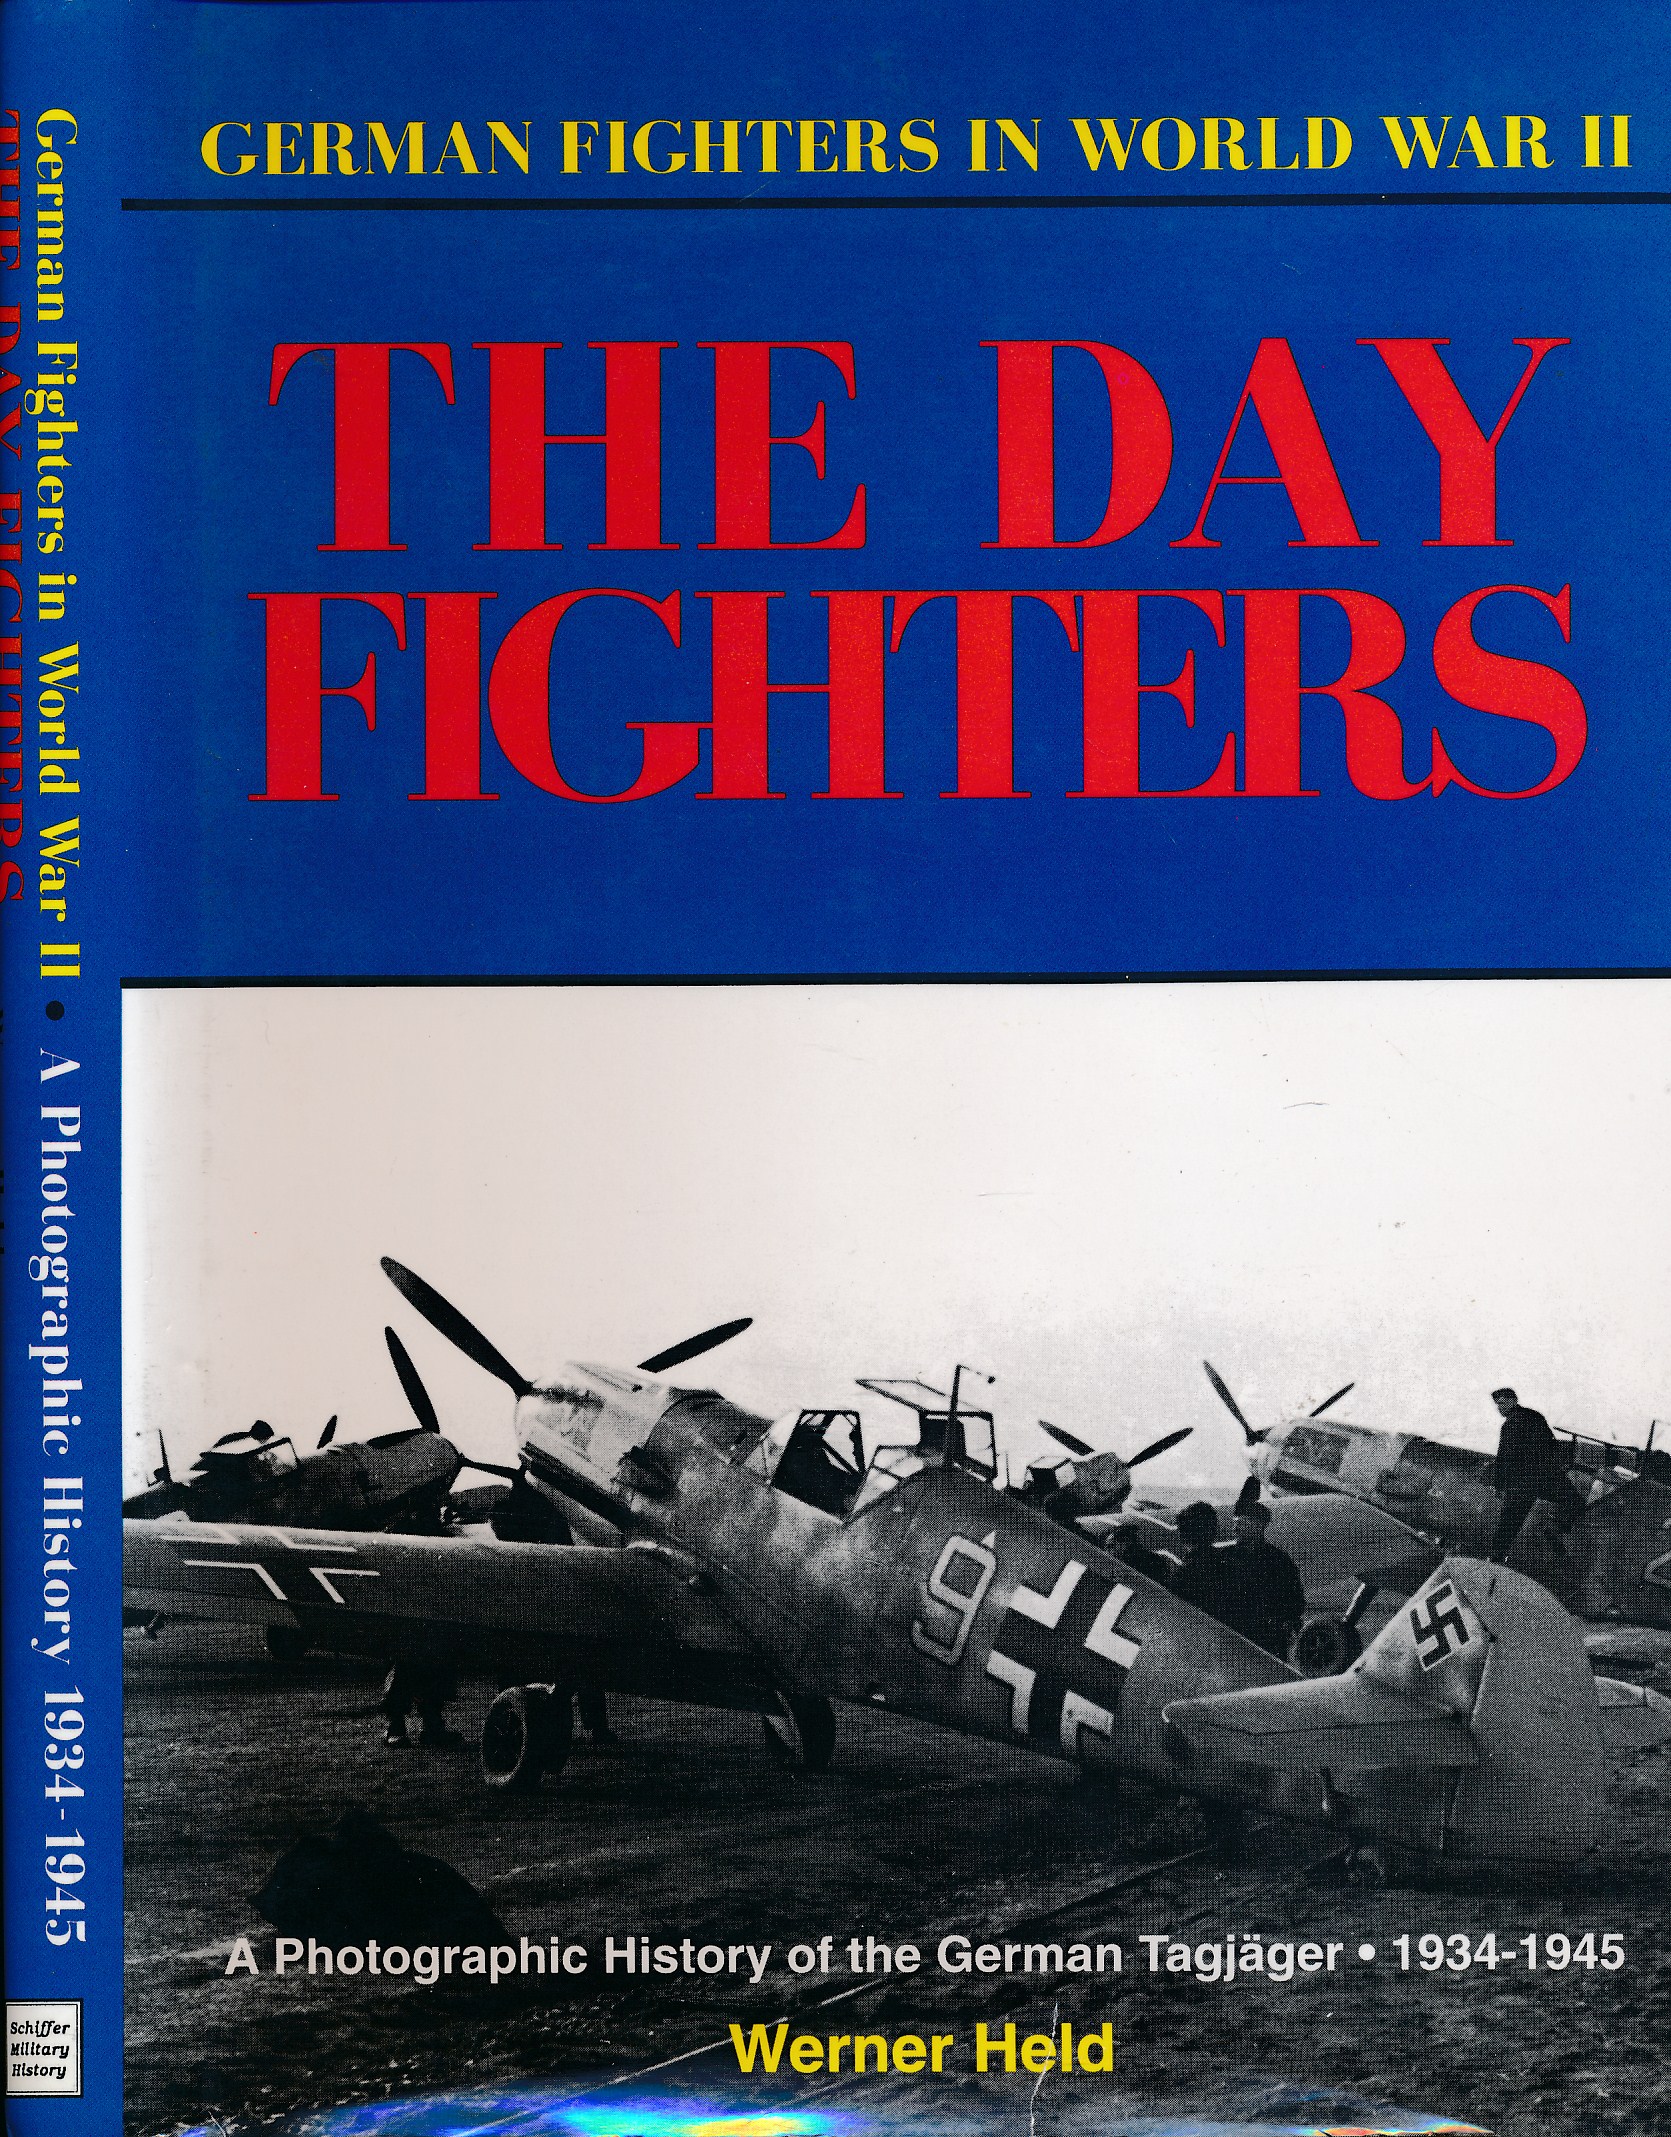 German Fighters in World War II. The Day Fighters. A Photographic History of the German Tagjger 1934-1945